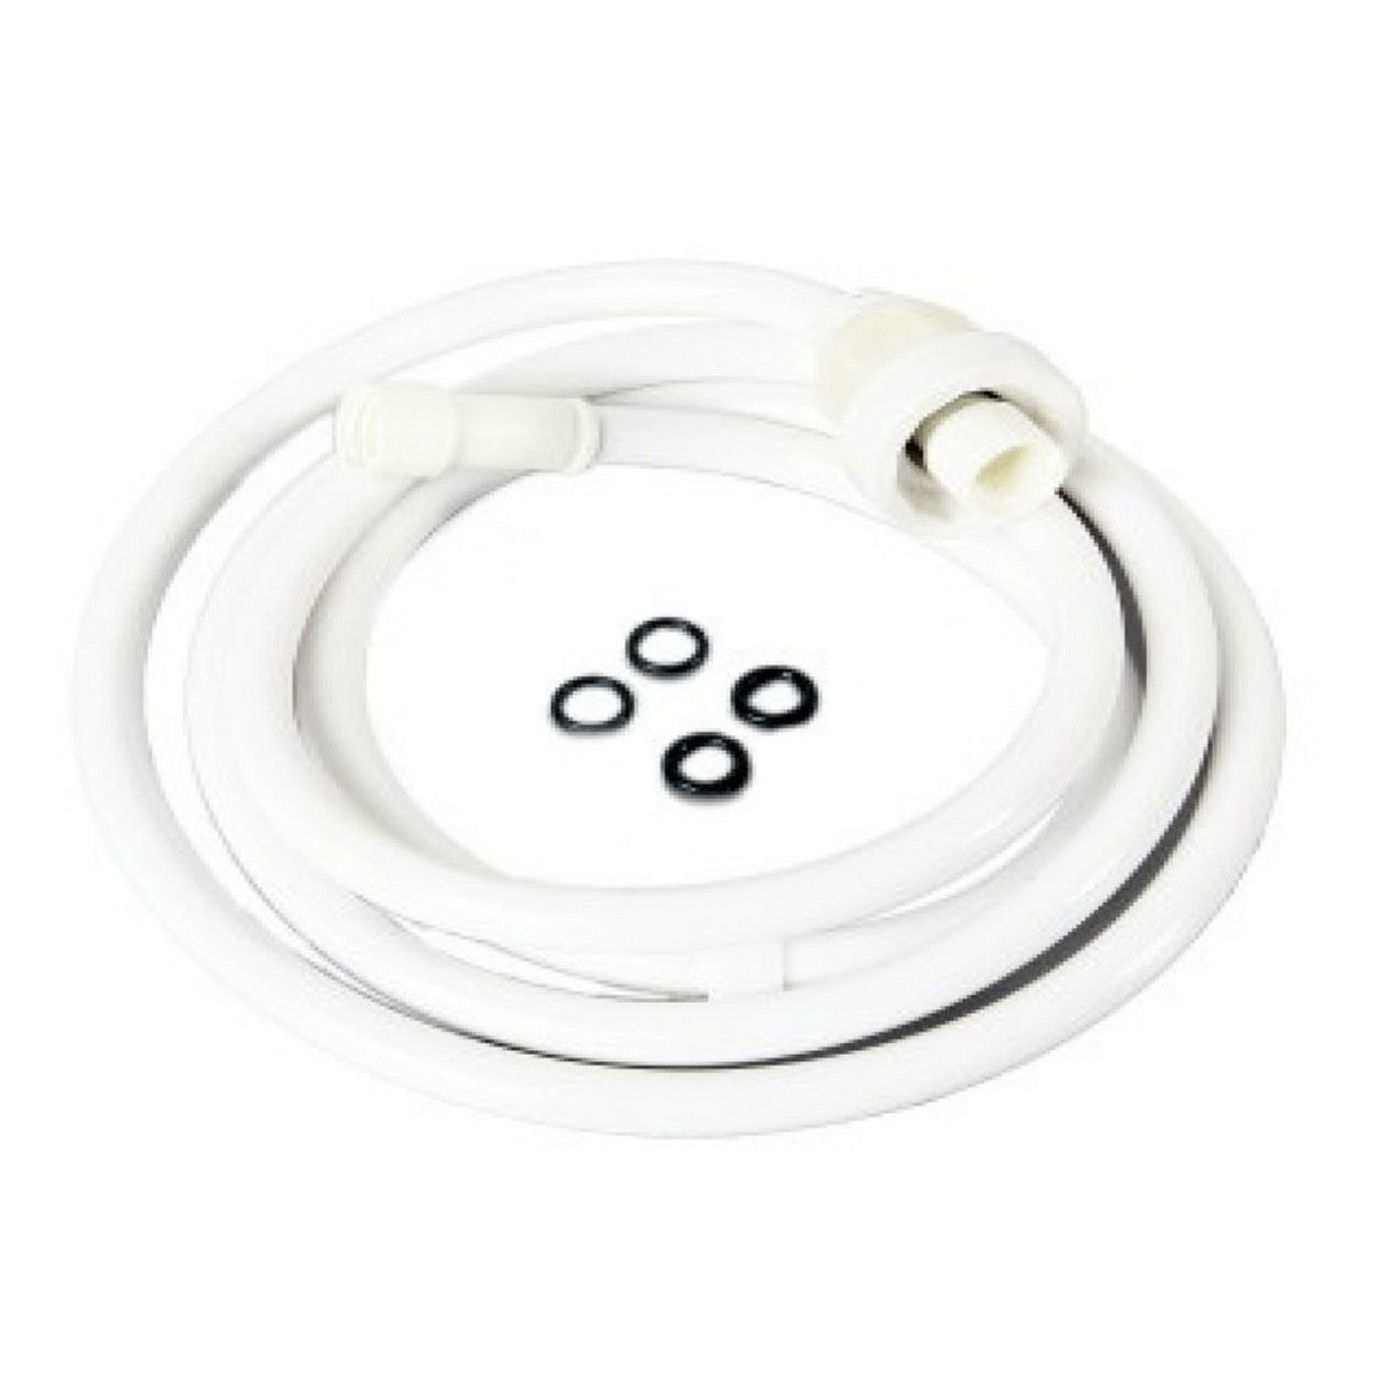 White AS5145 Whale Shower Hose Assembly 1.5M 